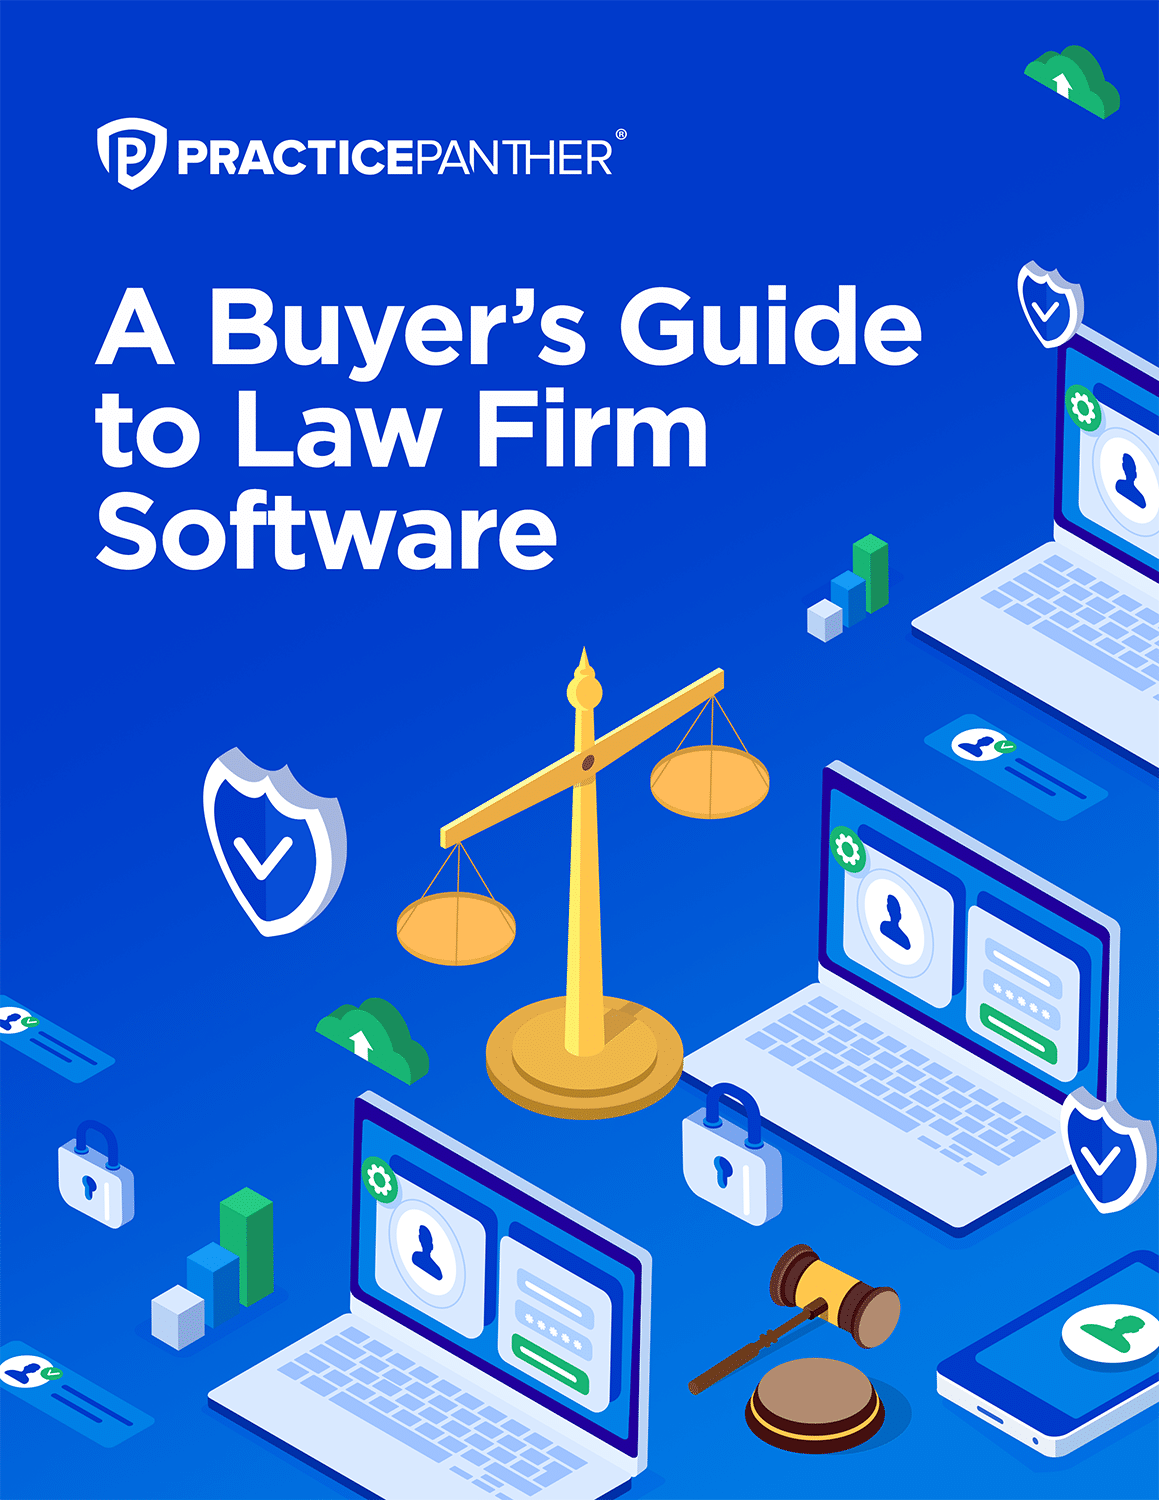 Download the Buyer's Guide to Law Firm Software